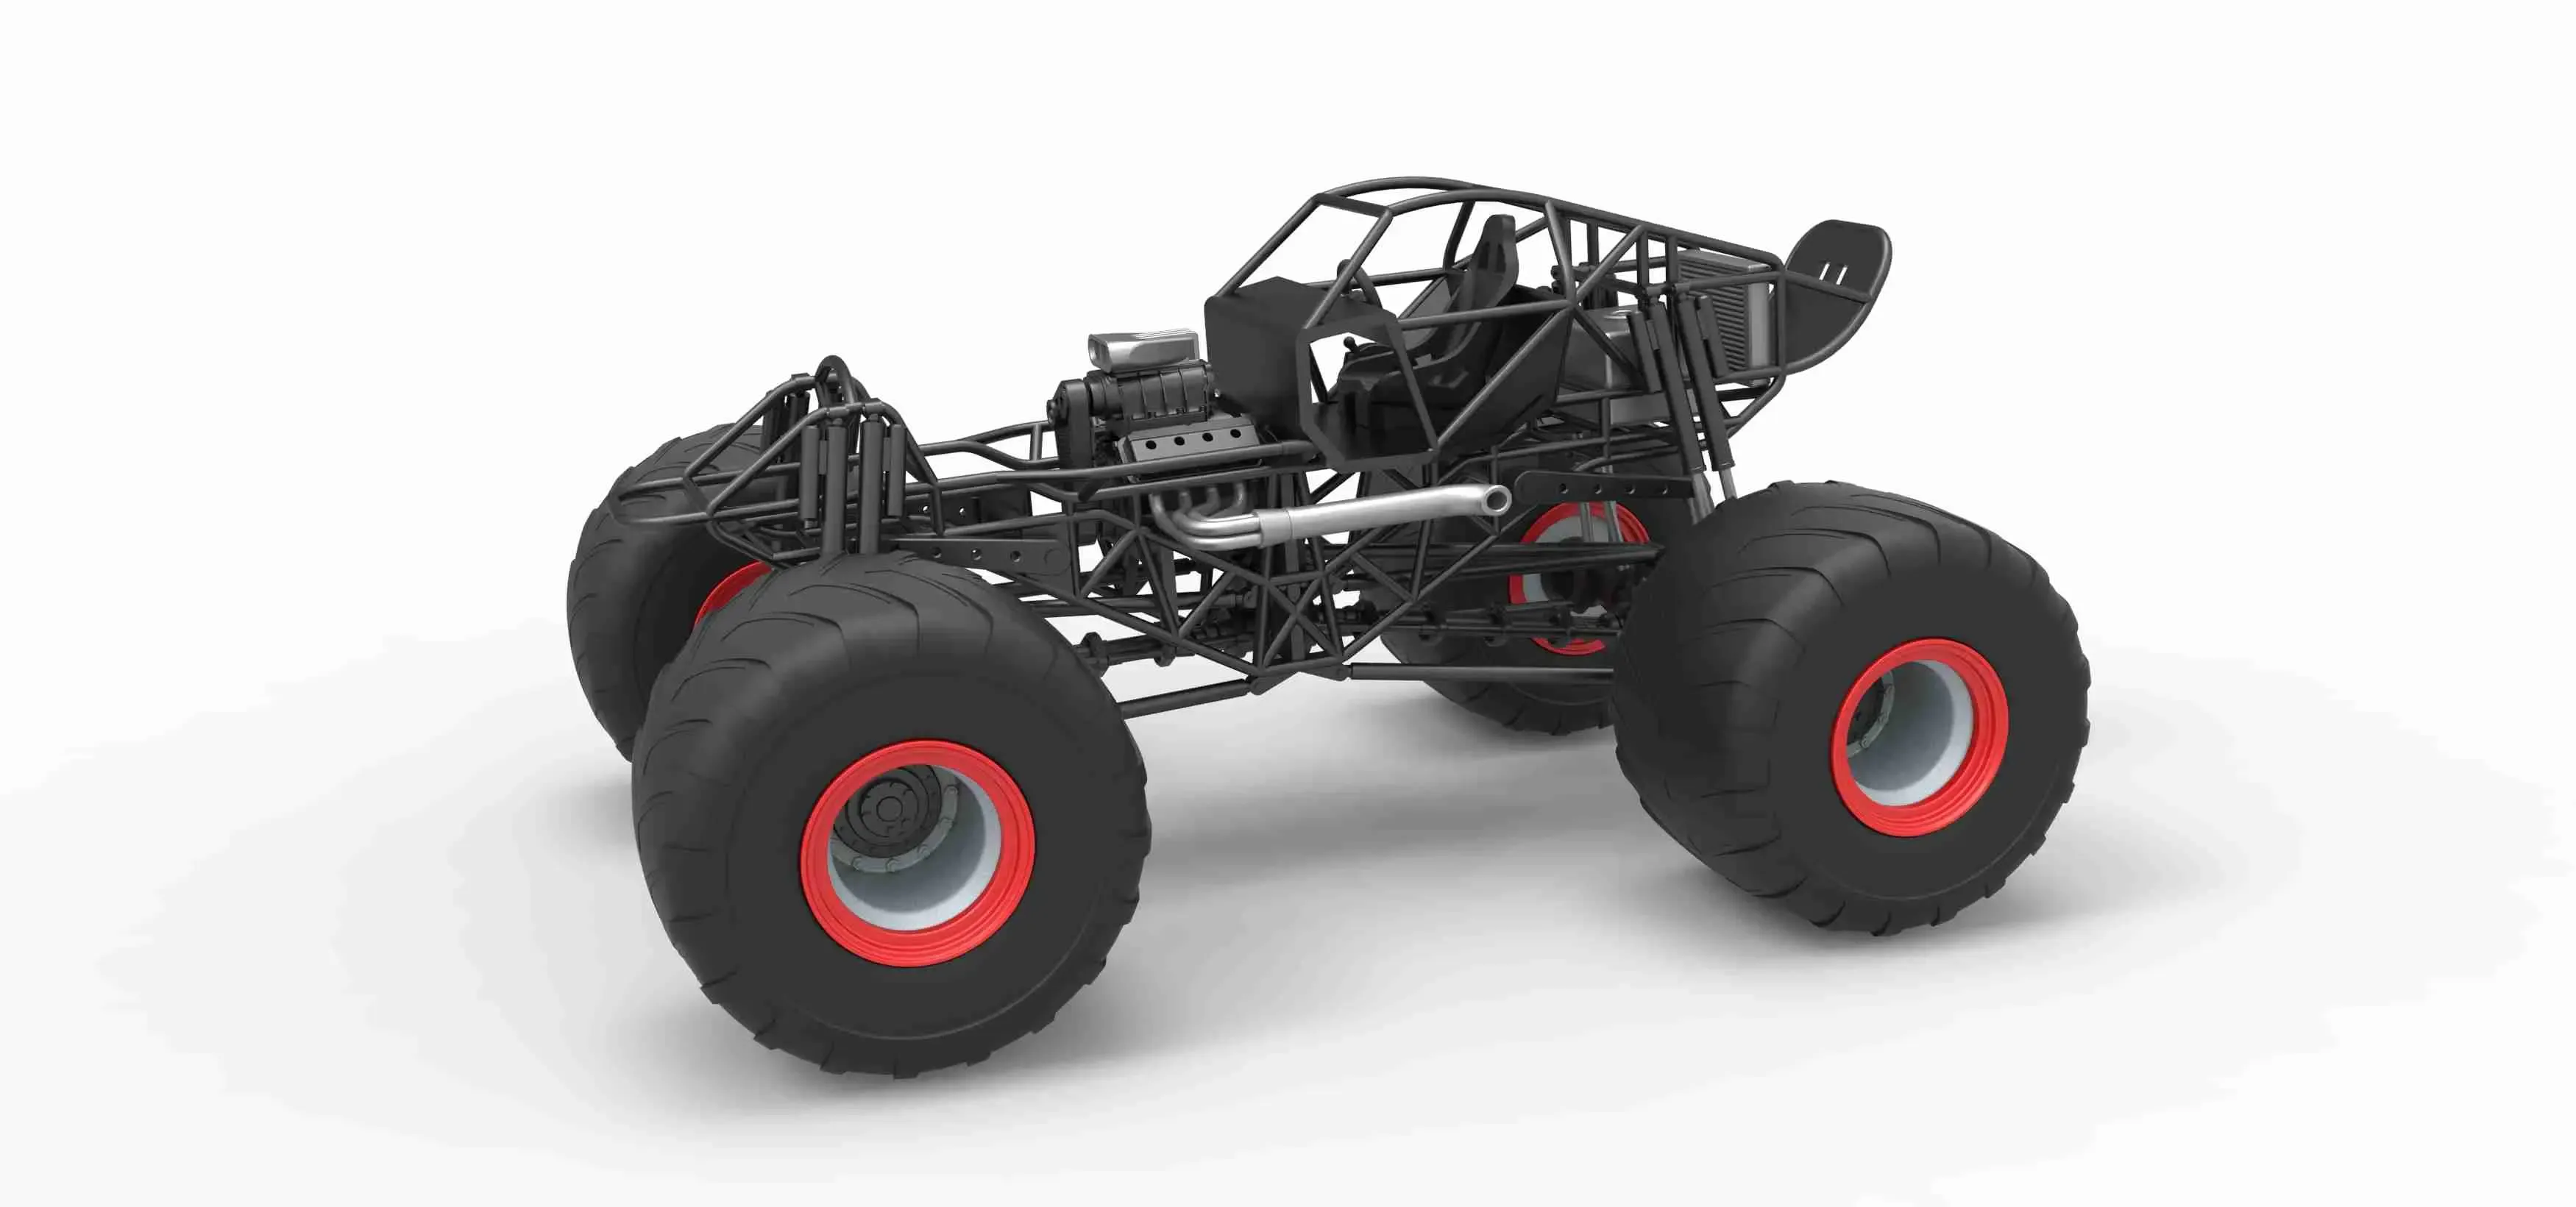 Monster truck base Version 2 Scale 1:25